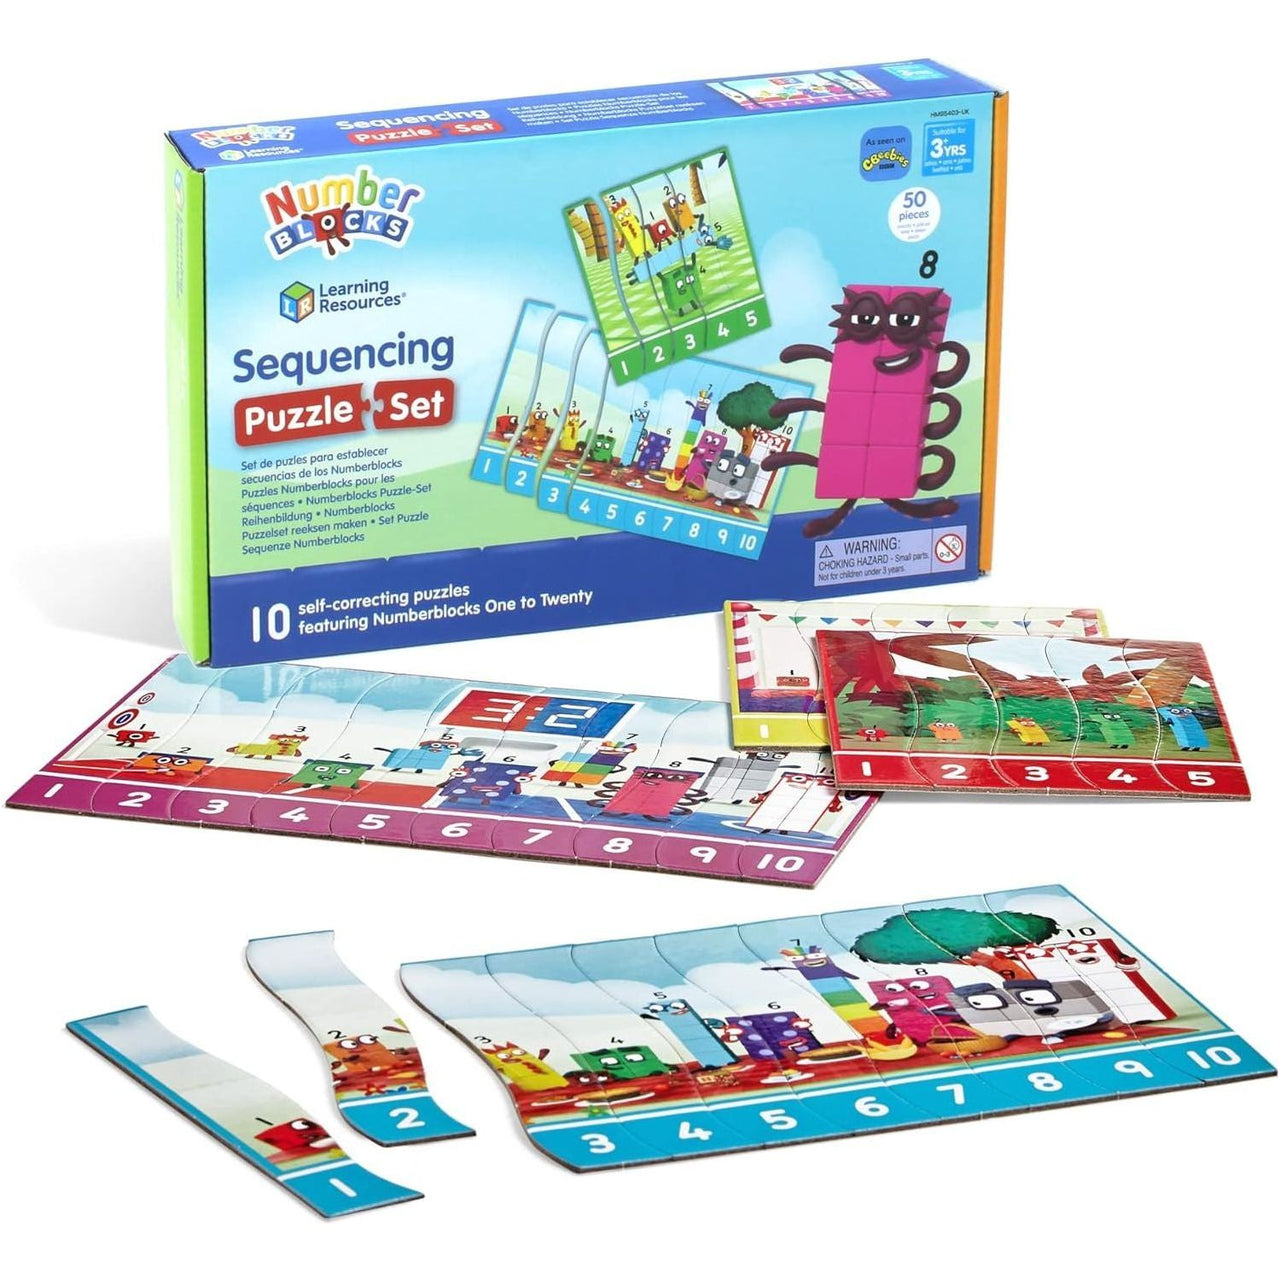 Numberblocks Sequencing Puzzle Set Learning Resources